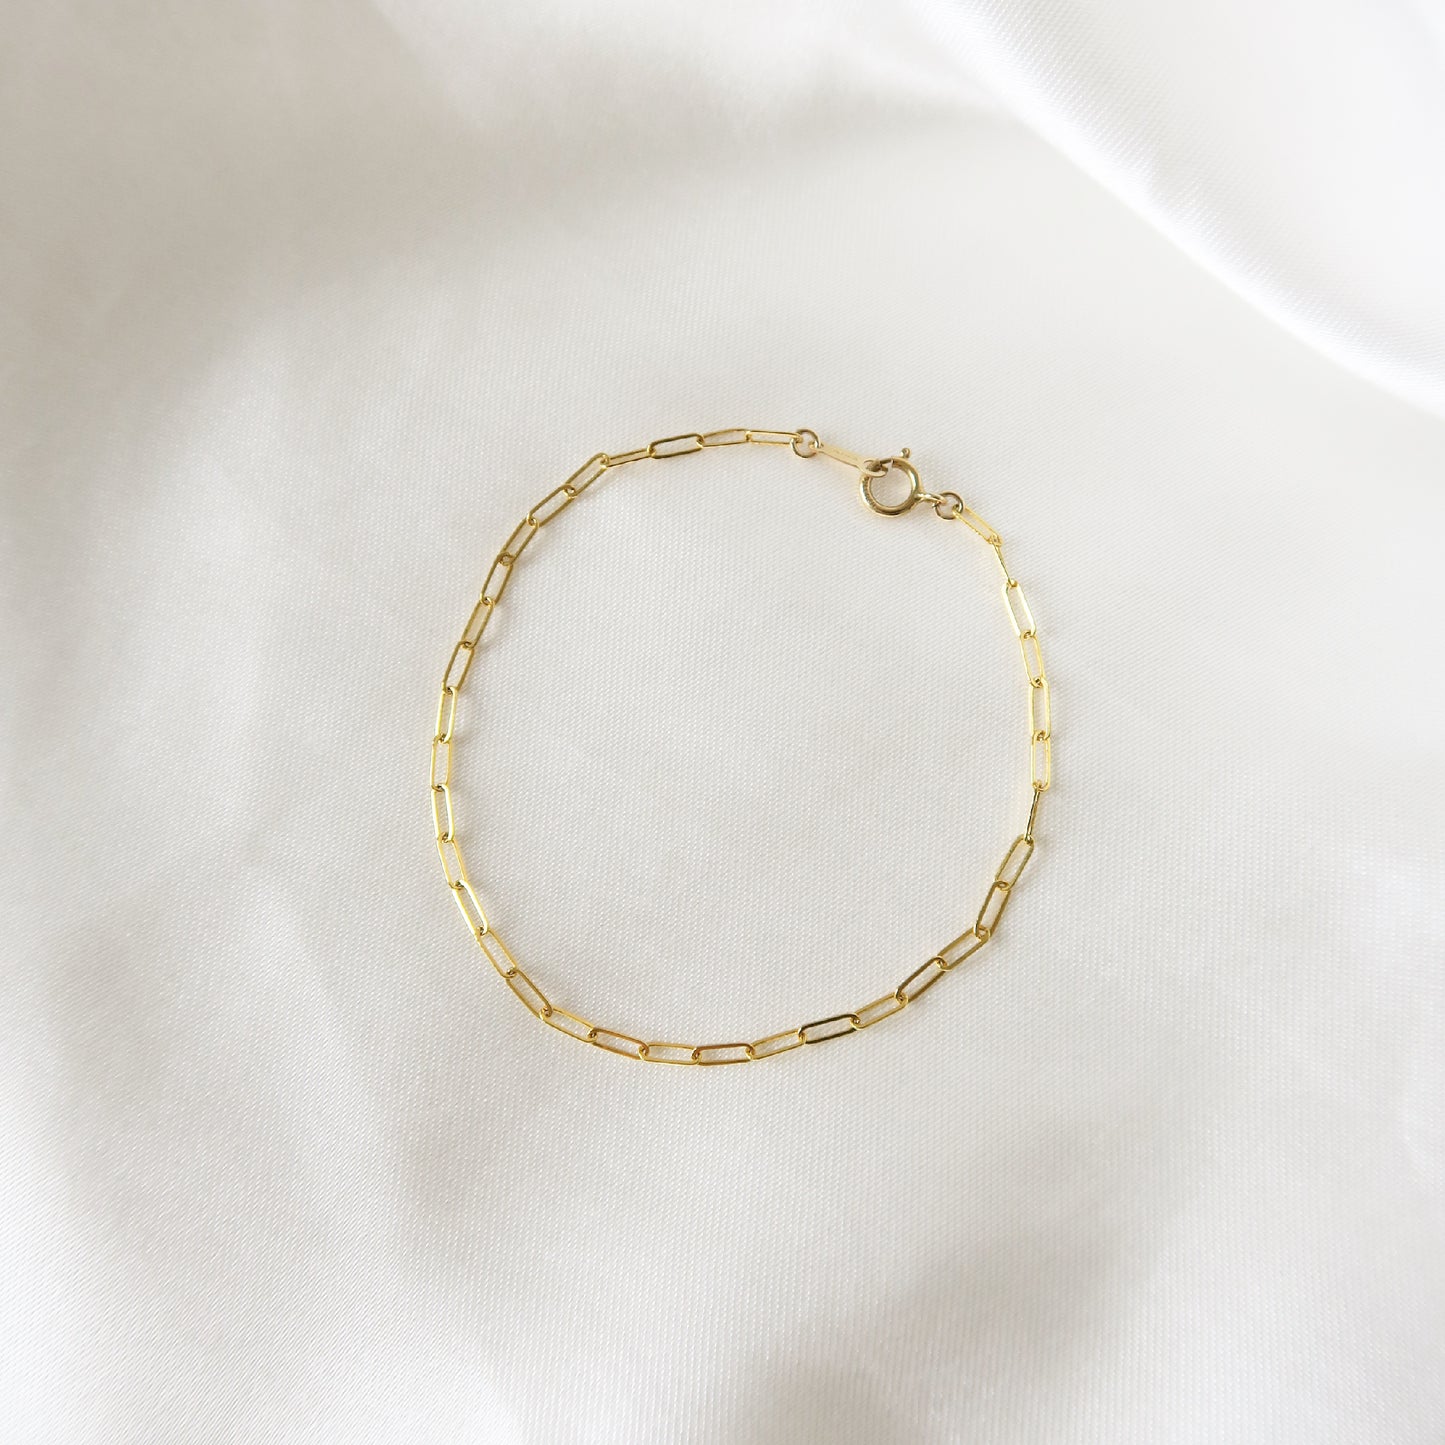 CABLE BRACELET - Yellow Gold & Silver